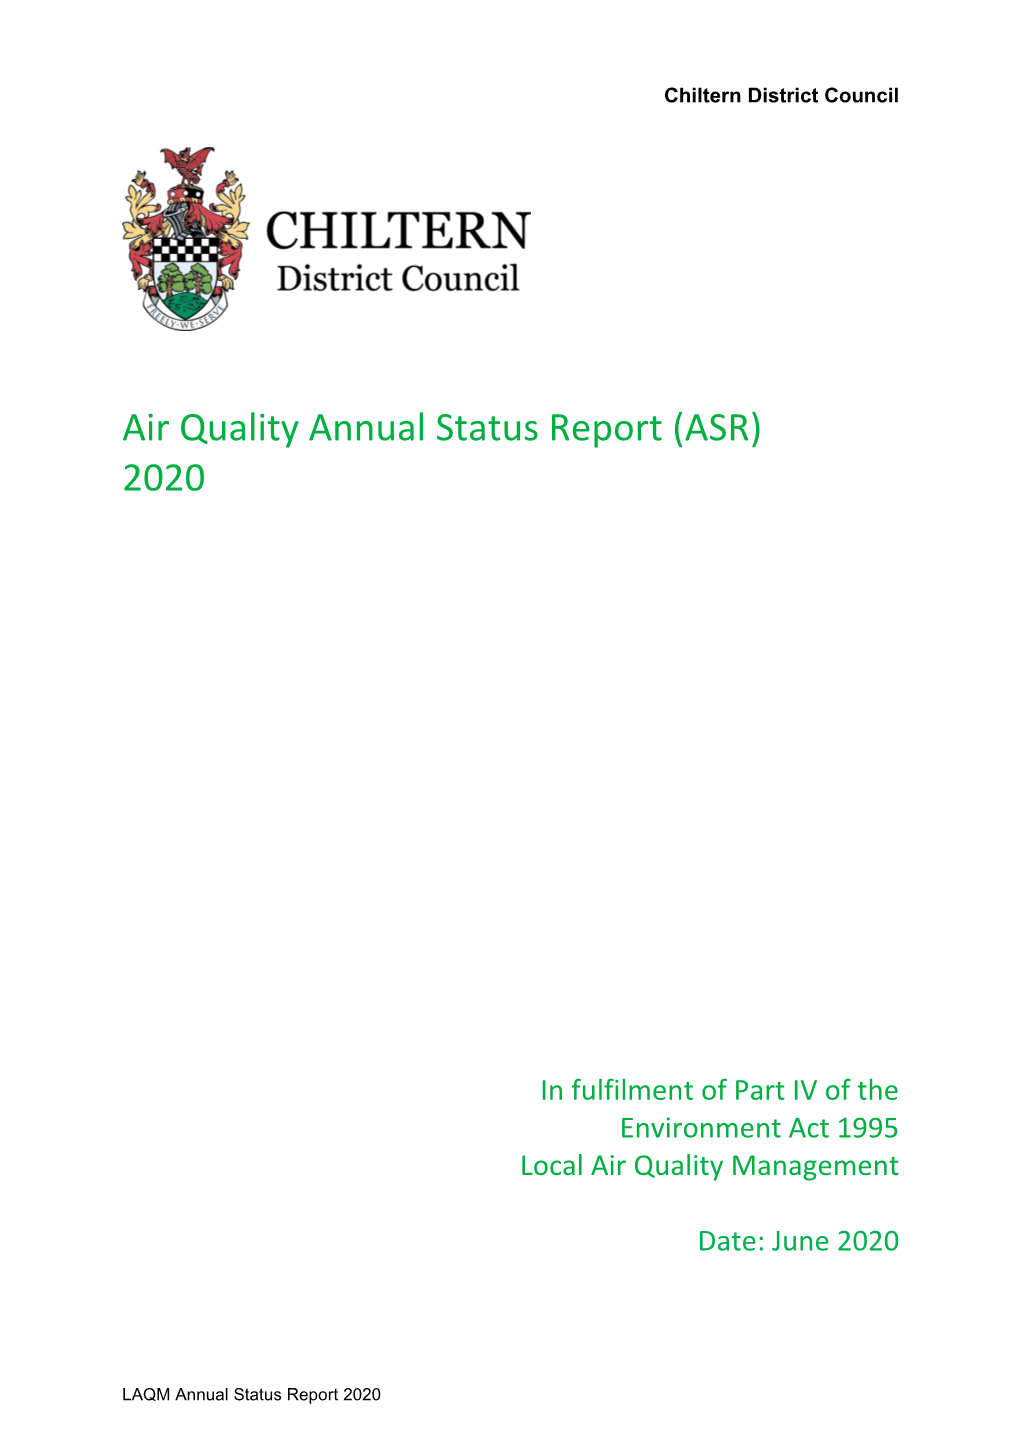 Executive Summary: Air Quality in Our Area Air Quality in Chiltern District Council